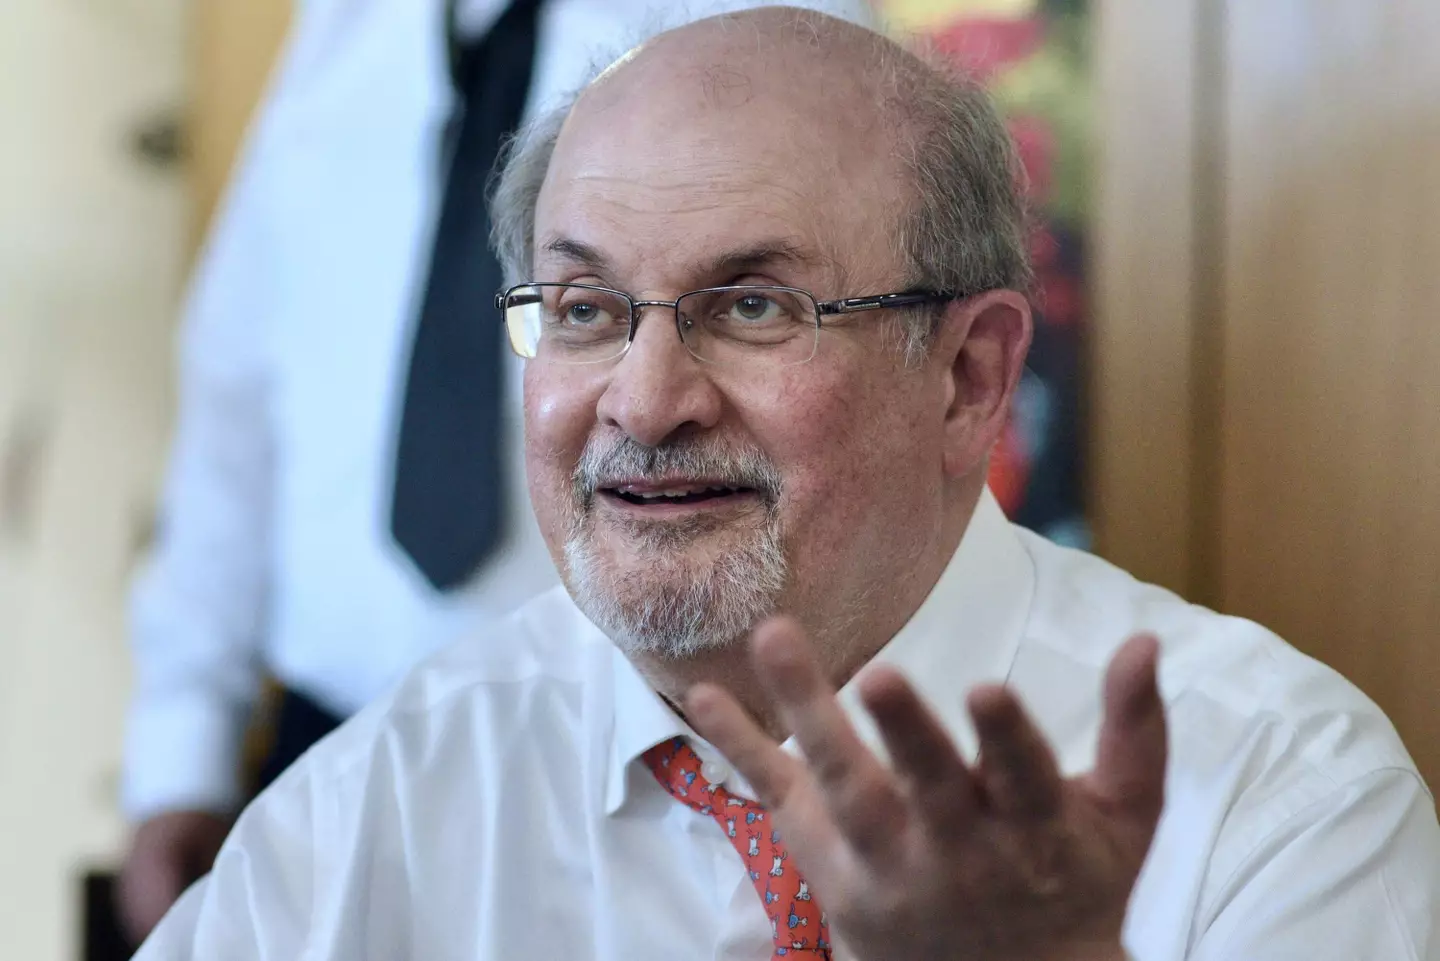 Rushdie has been put on a ventilator as a result of the incident.